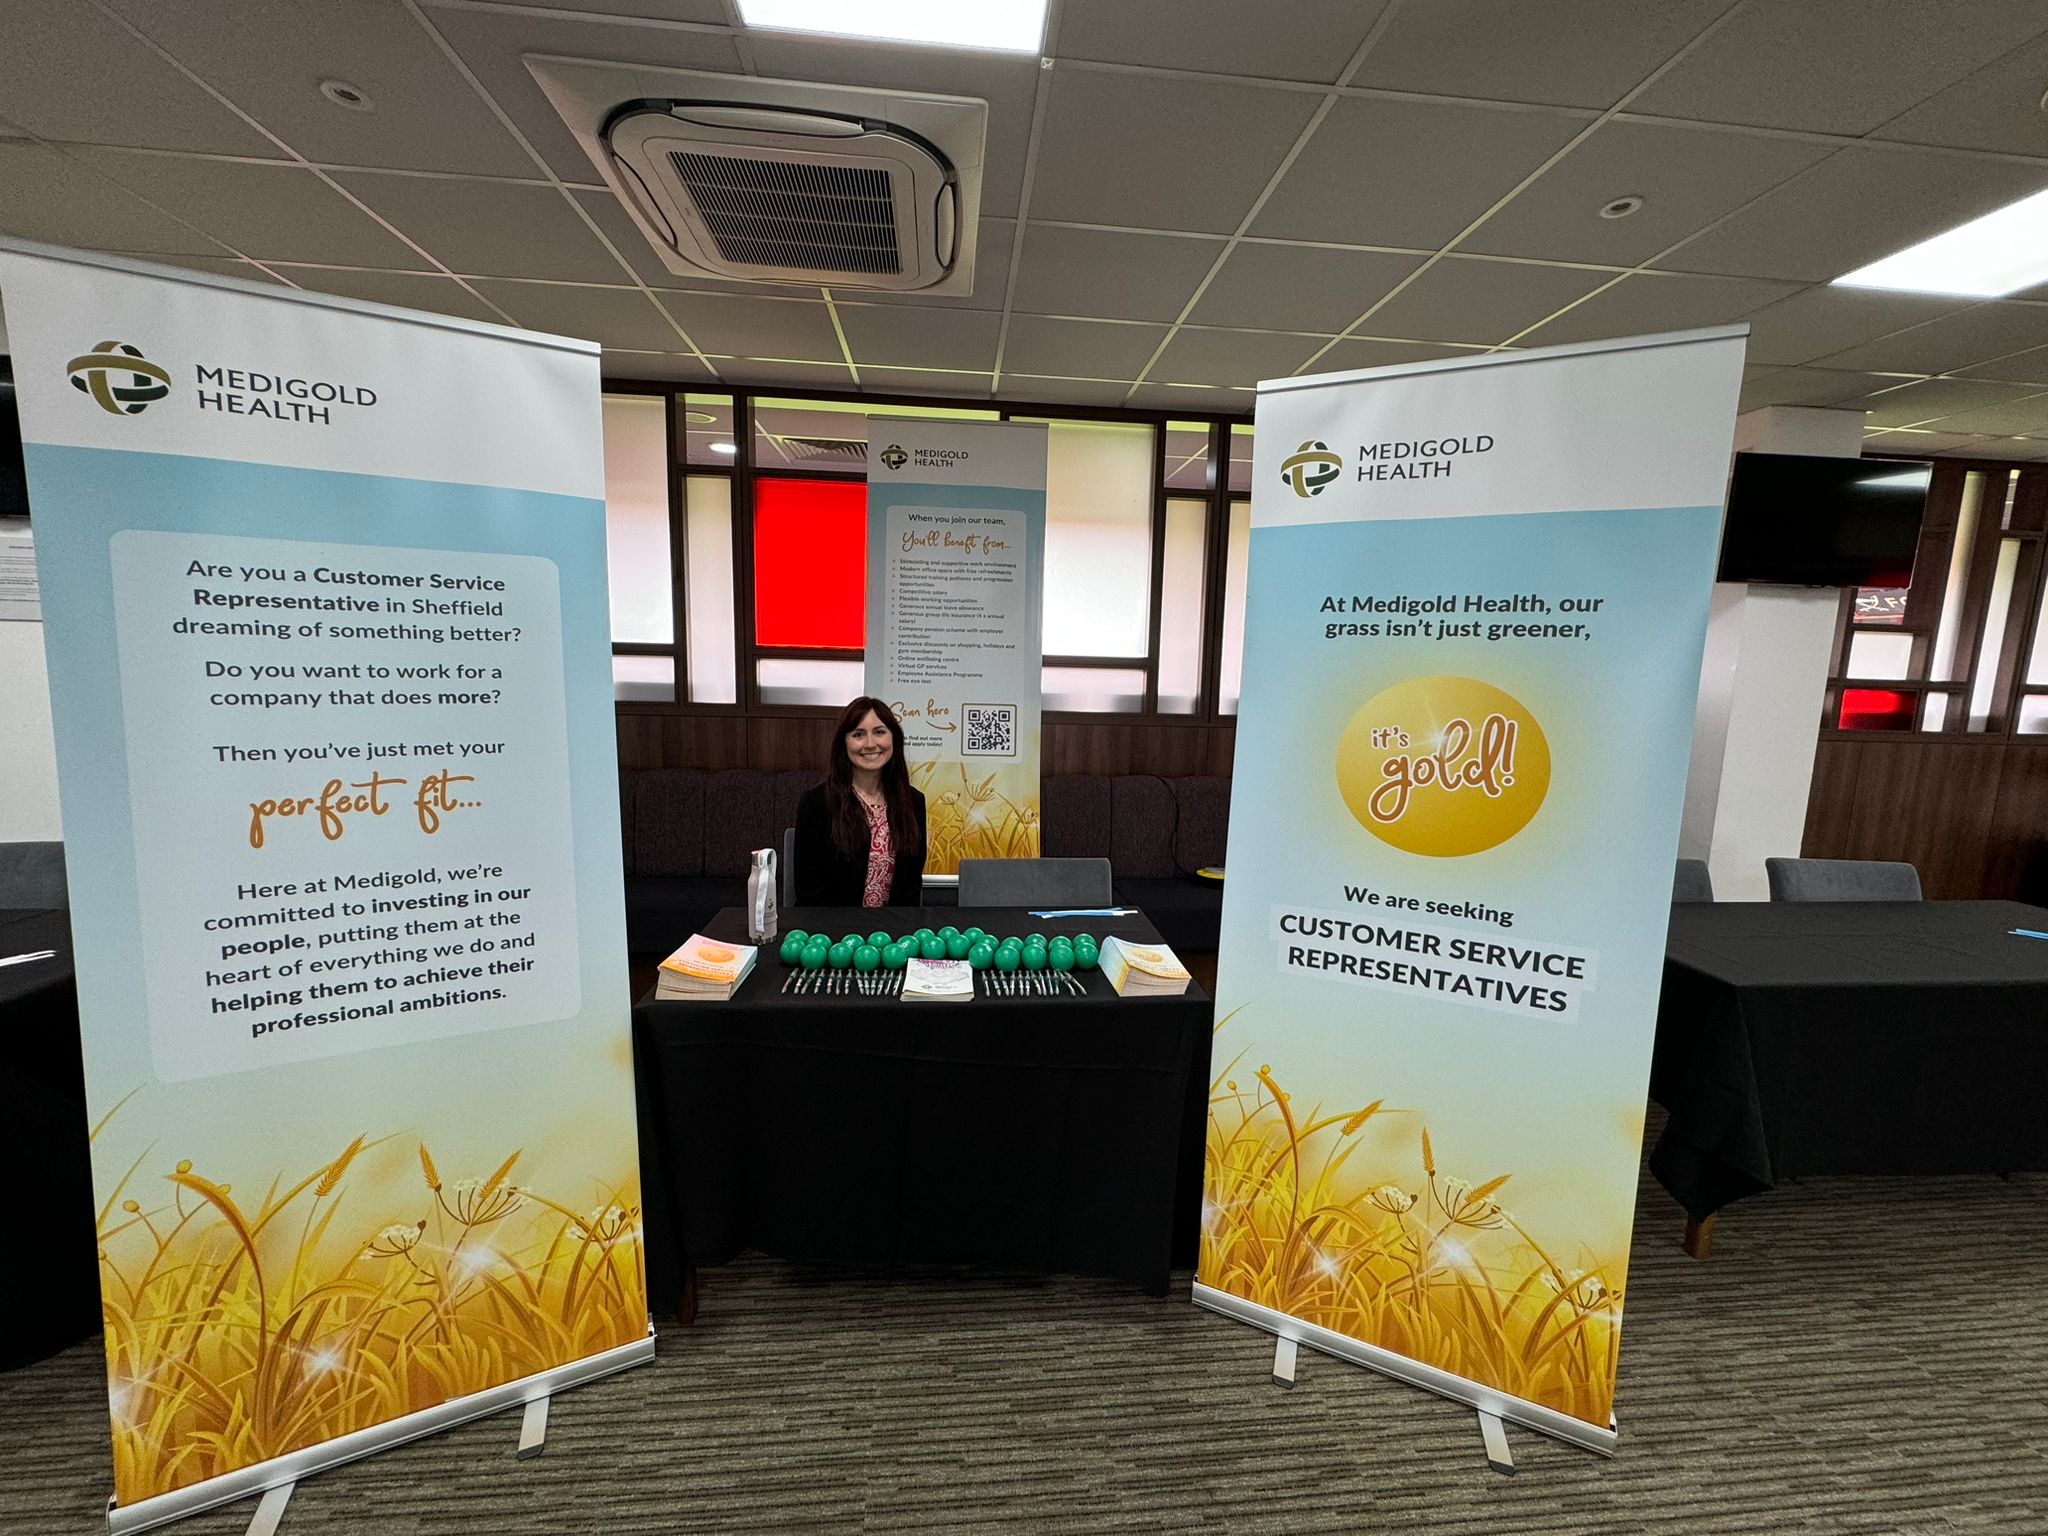 Medigold Health at our event in Sheffield